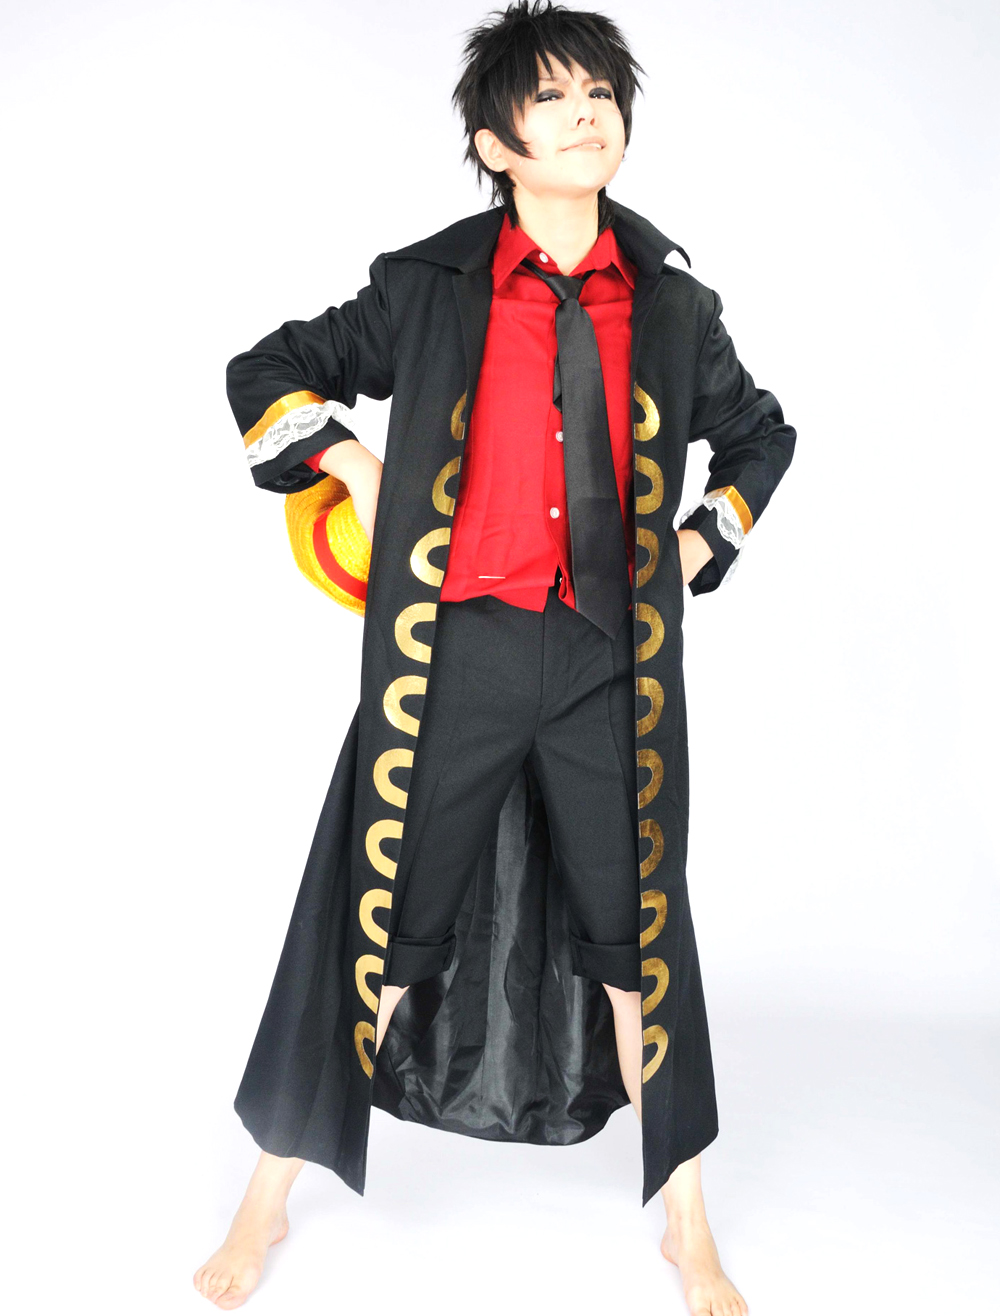 One Piece Film Strong World Monkey·D·Luffy Captain Cosplay Costu